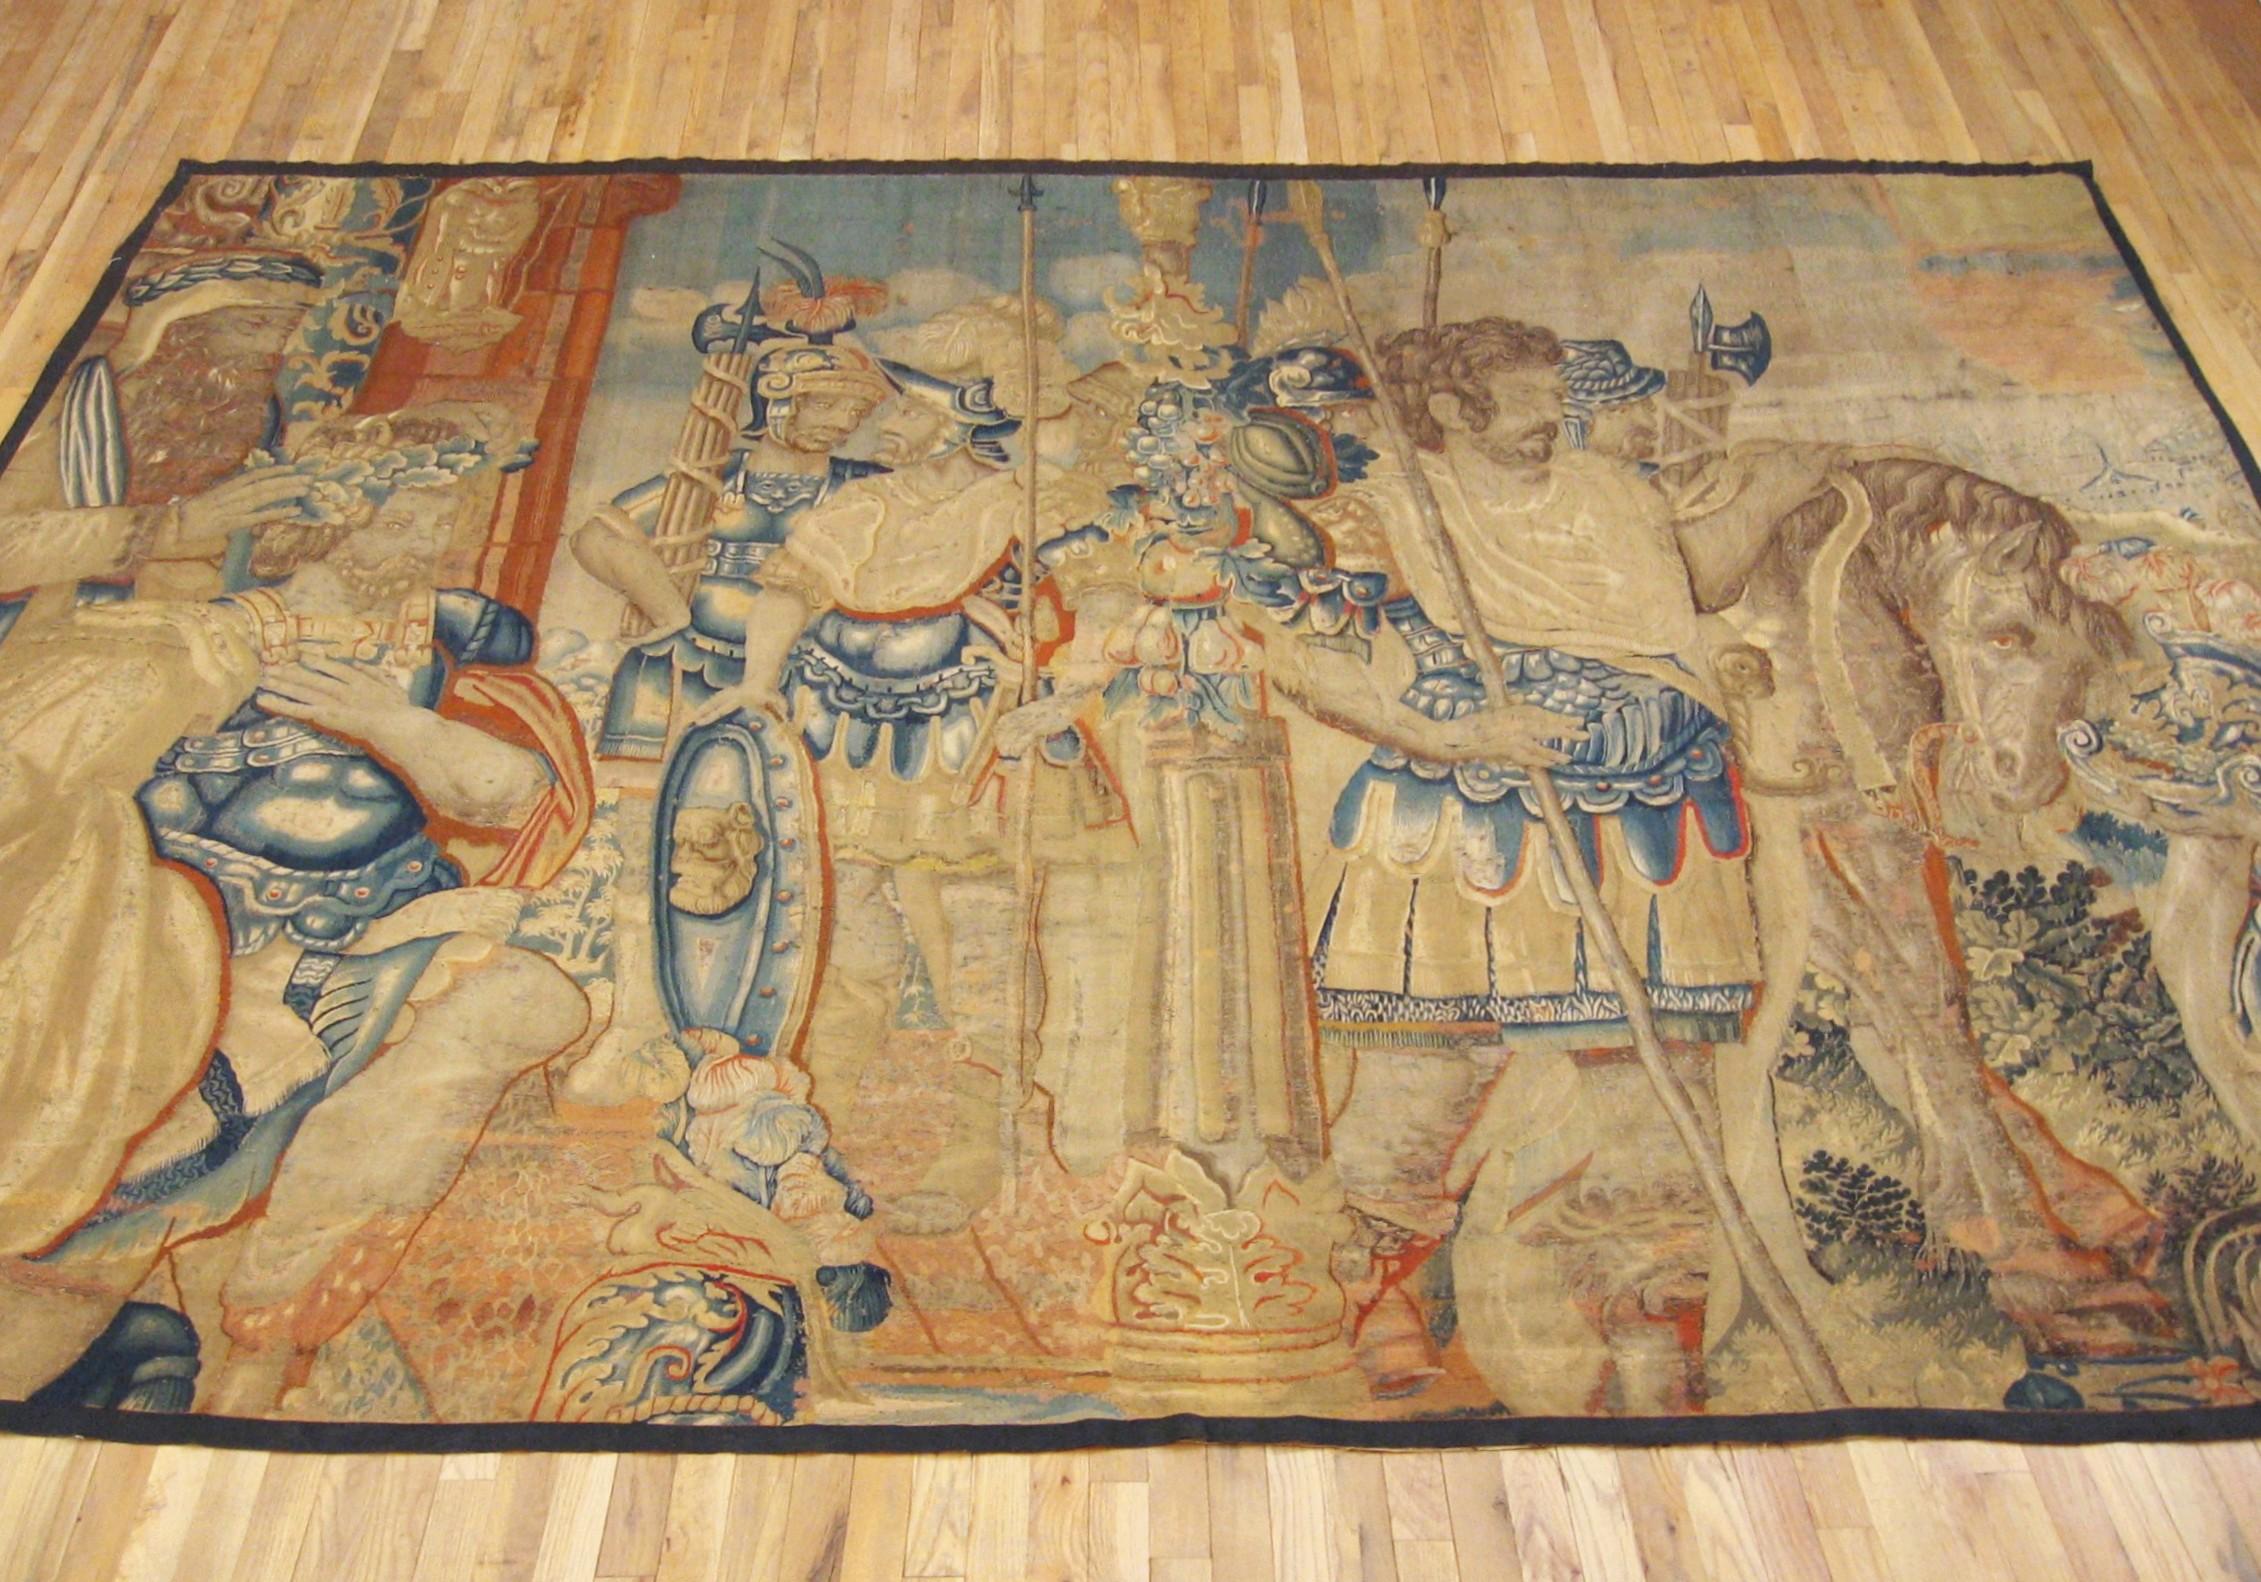 A French Aubusson mythological tapestry from the 17th century, depicting the Spartan king, Menelaus, seated at left, sending his brother Agamemnon and the Greek troops to Troy to recover his wife, Helen, who had been abducted by Paris, thus starting